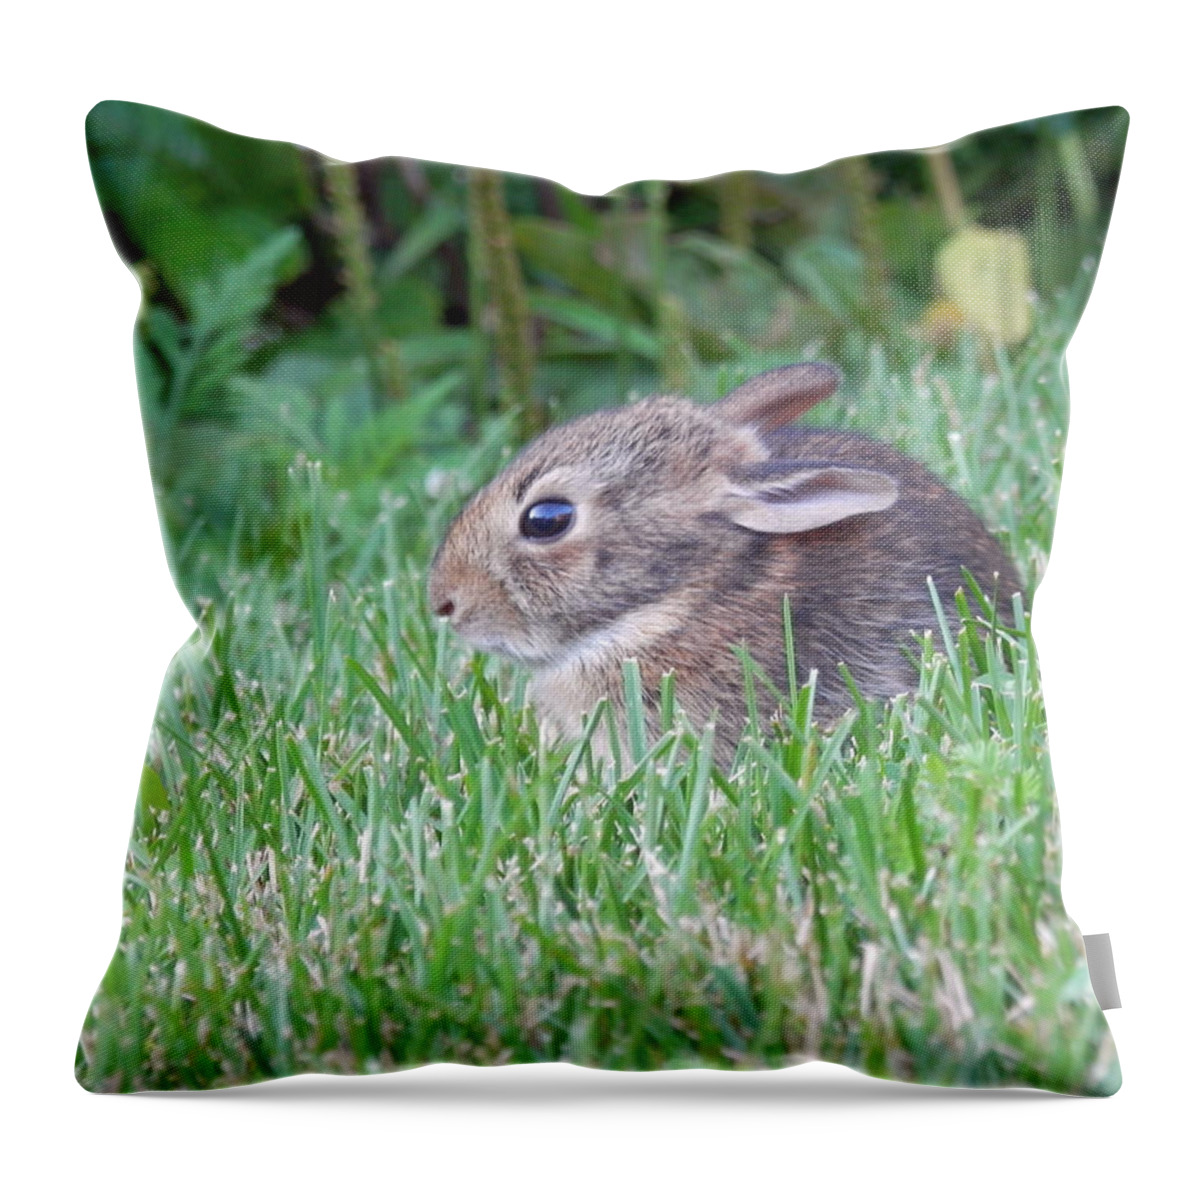 Bunny Throw Pillow featuring the photograph Little Bunny Wabbit 1 by Pema Hou